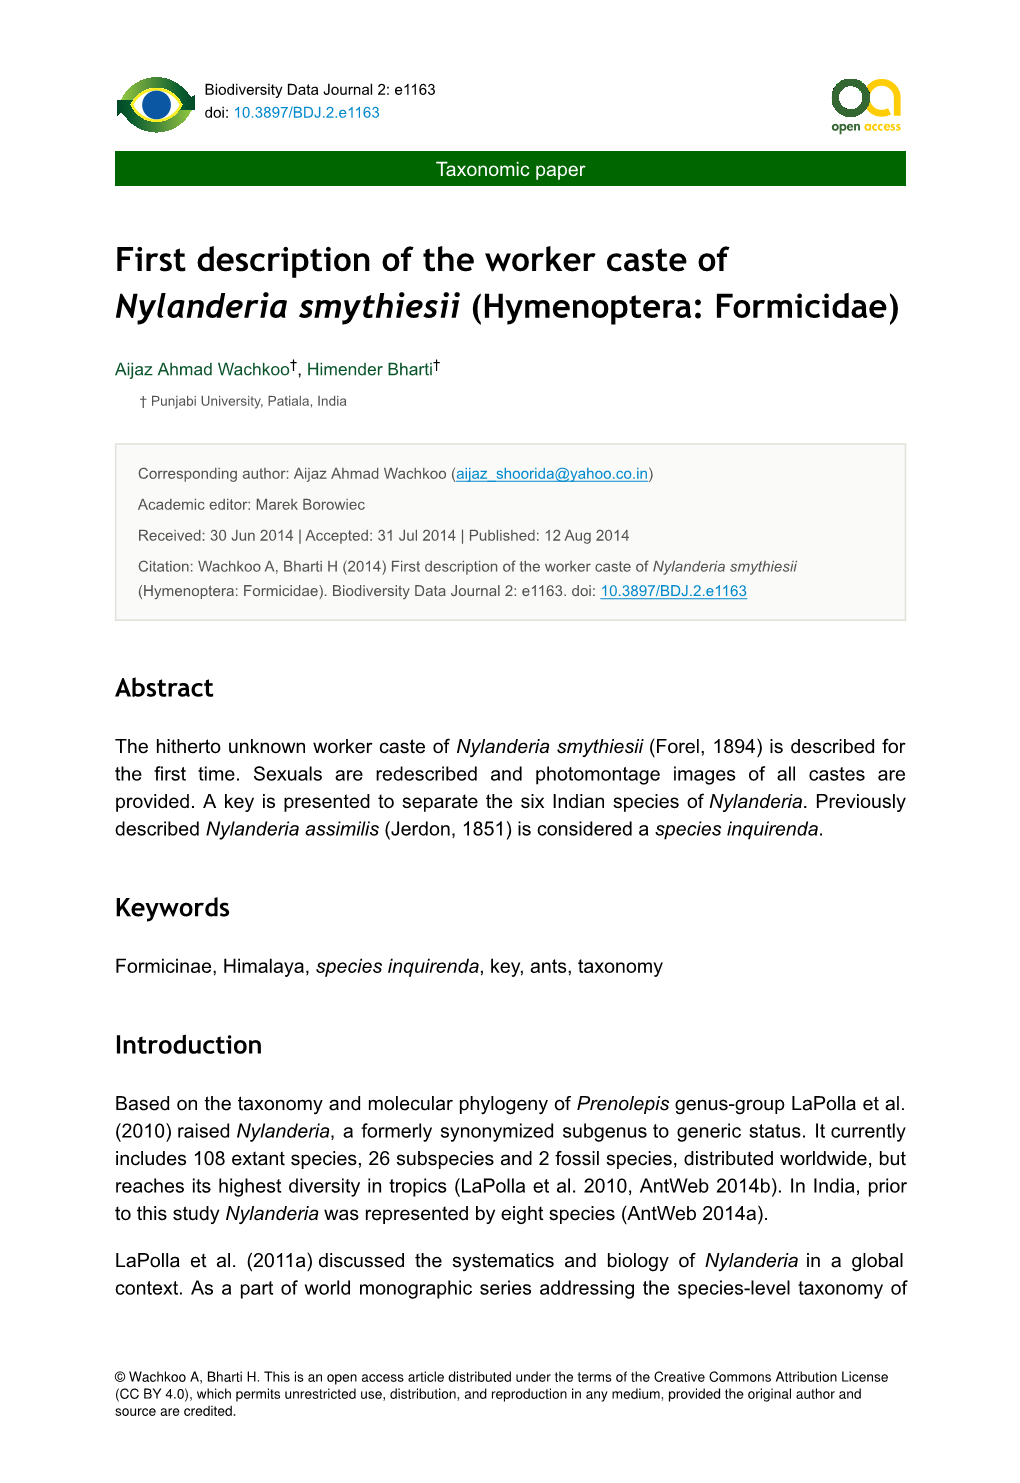 First Description of the Worker Caste of Nylanderia Smythiesii (Hymenoptera: Formicidae)